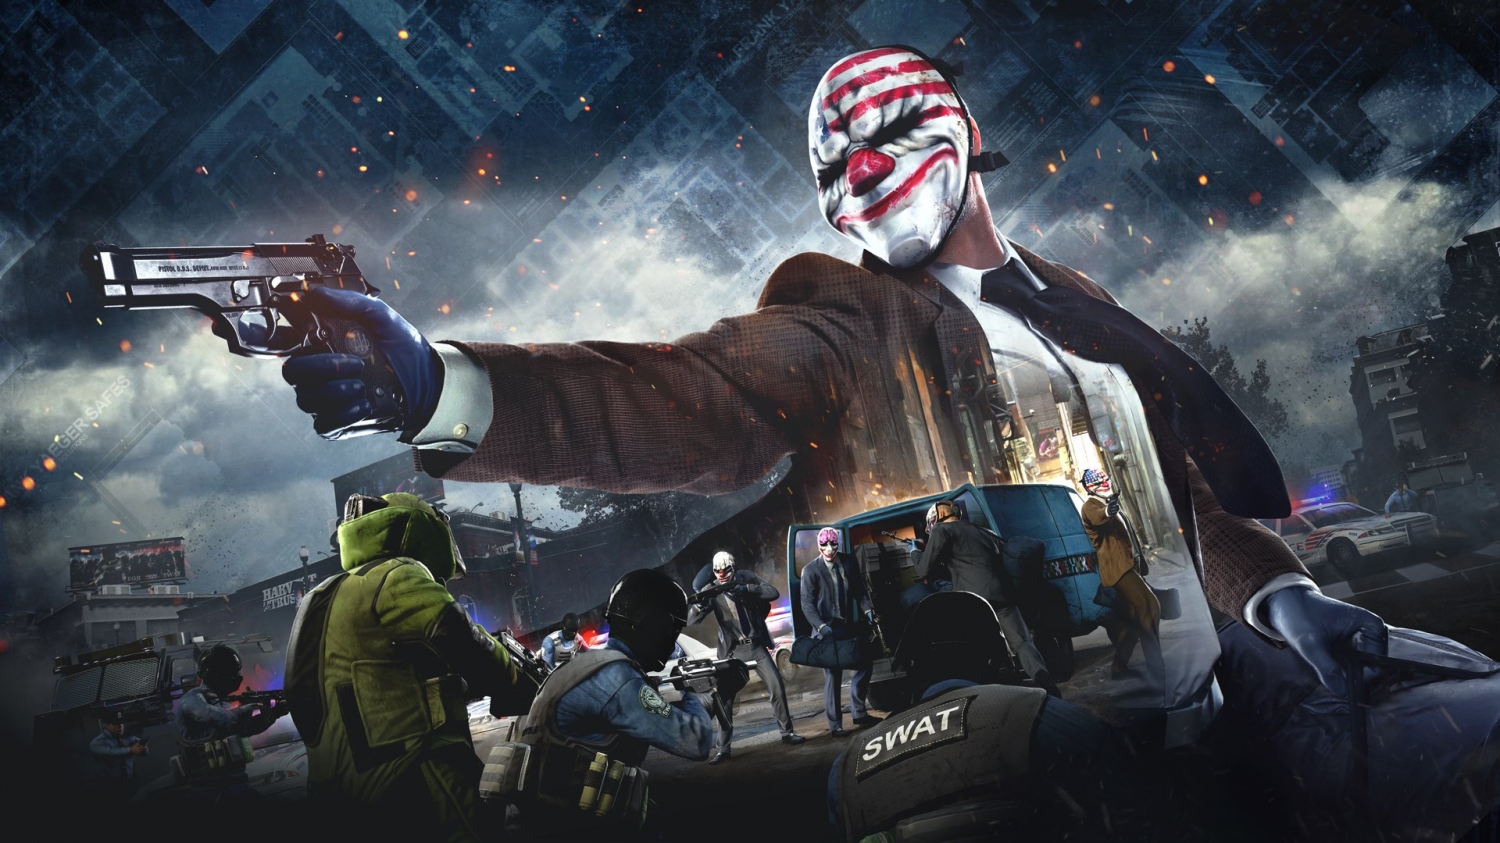 505 Games will get a cut of Payday 3's future earnings